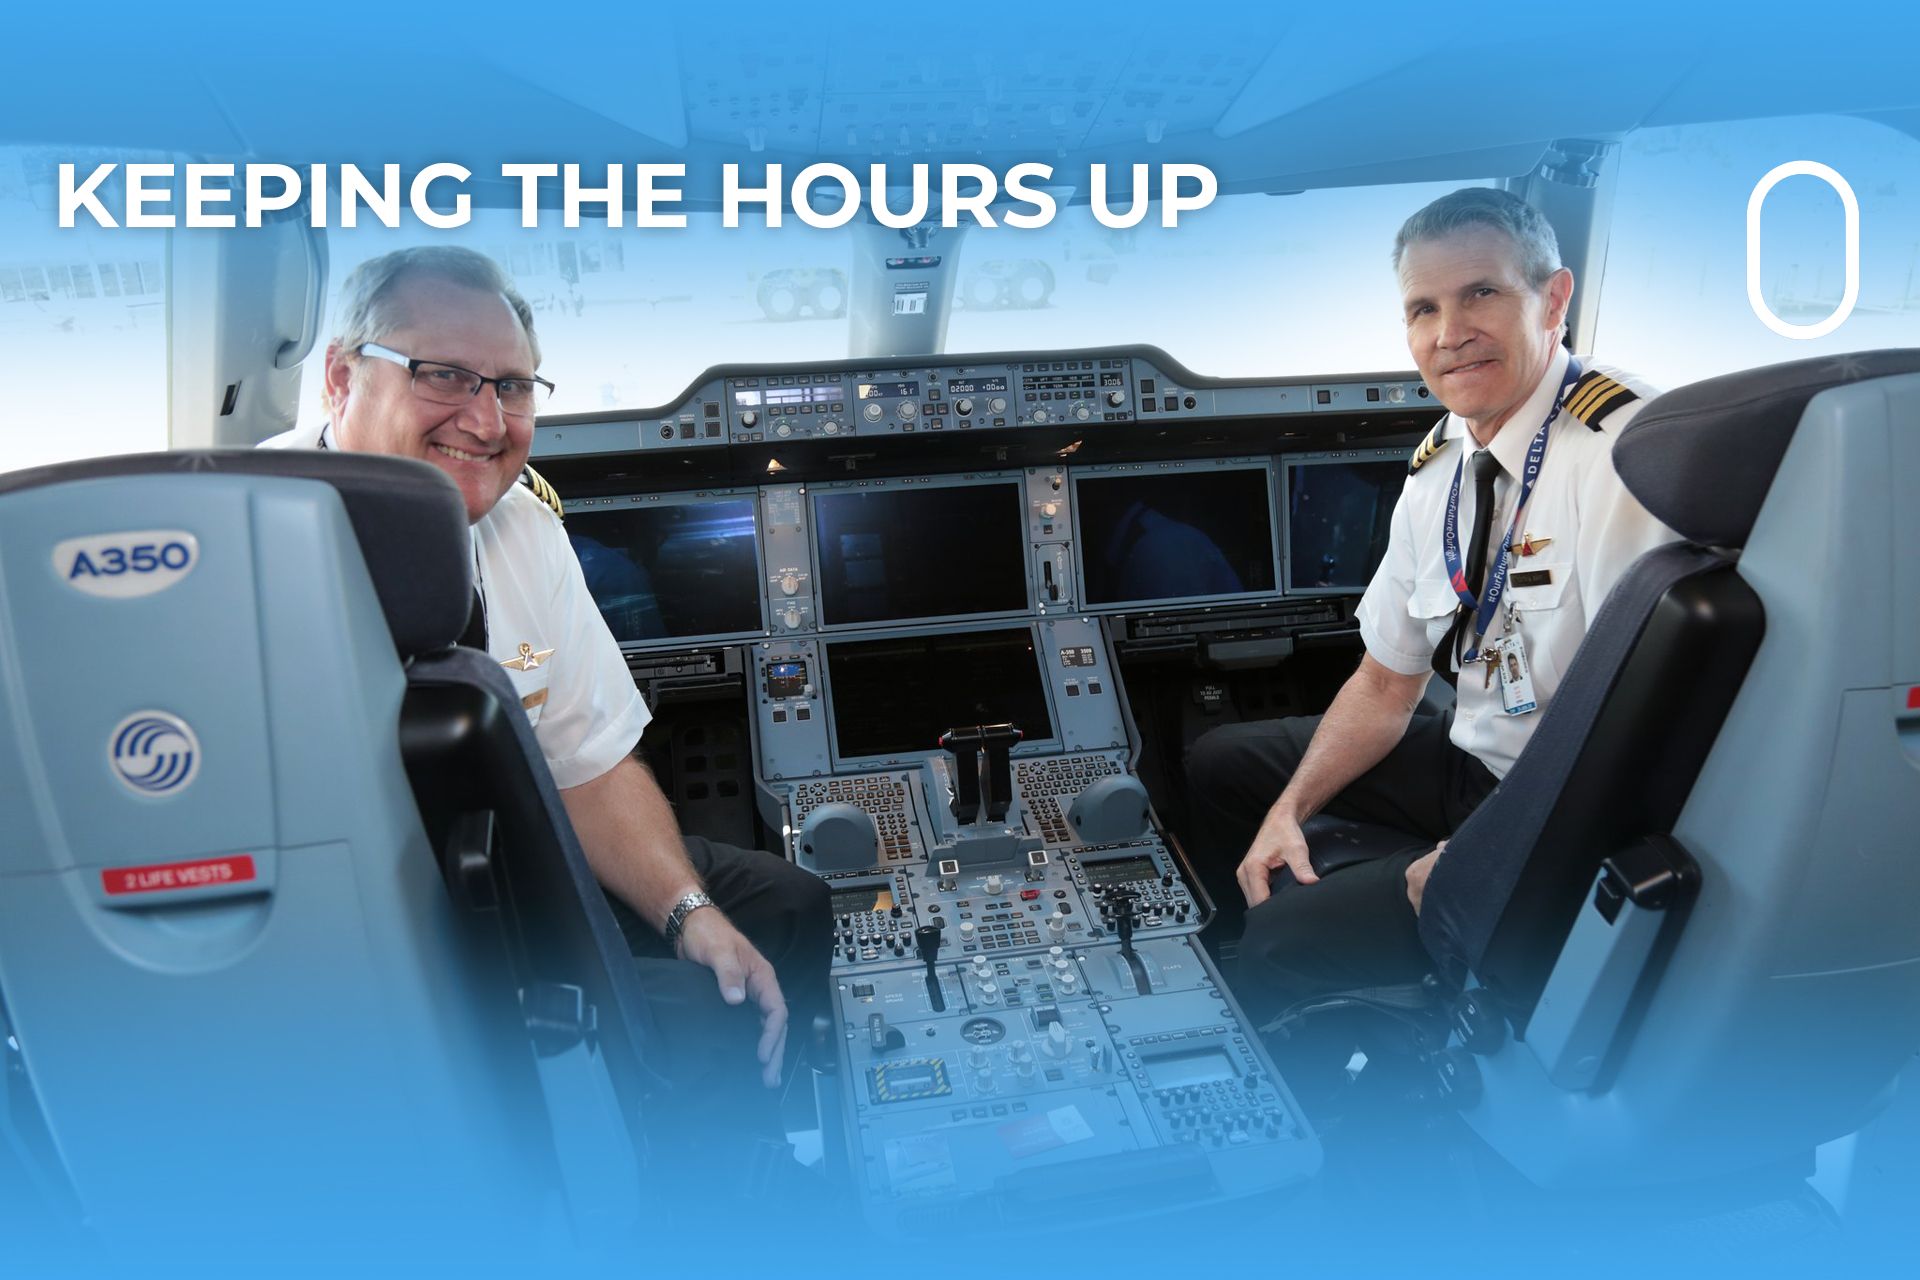 How Many Hours Should Pilots Fly Yearly To Retain Their Numerous Certifications?